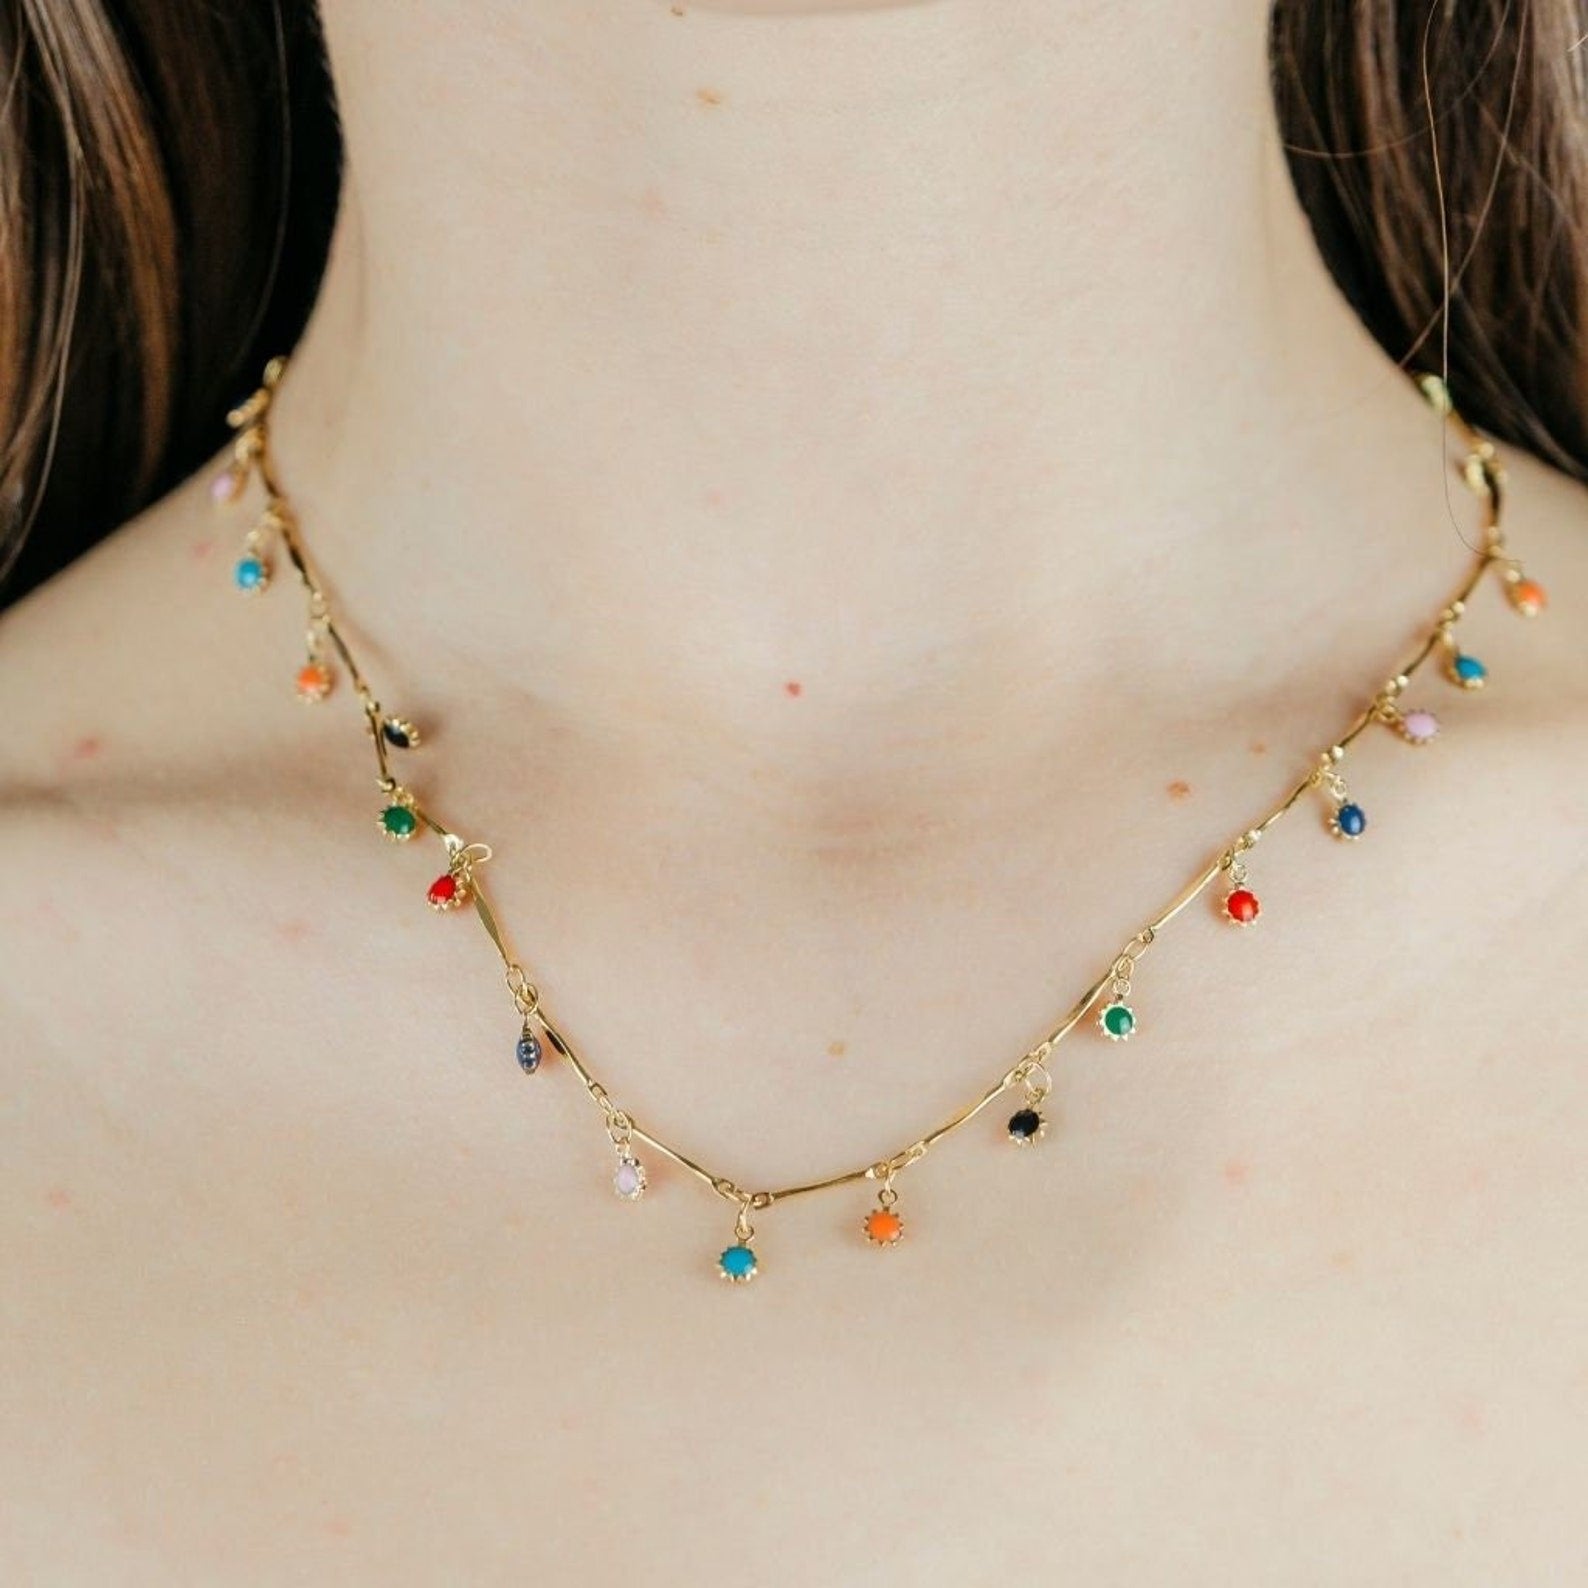 Gold and silver choker dainty necklace